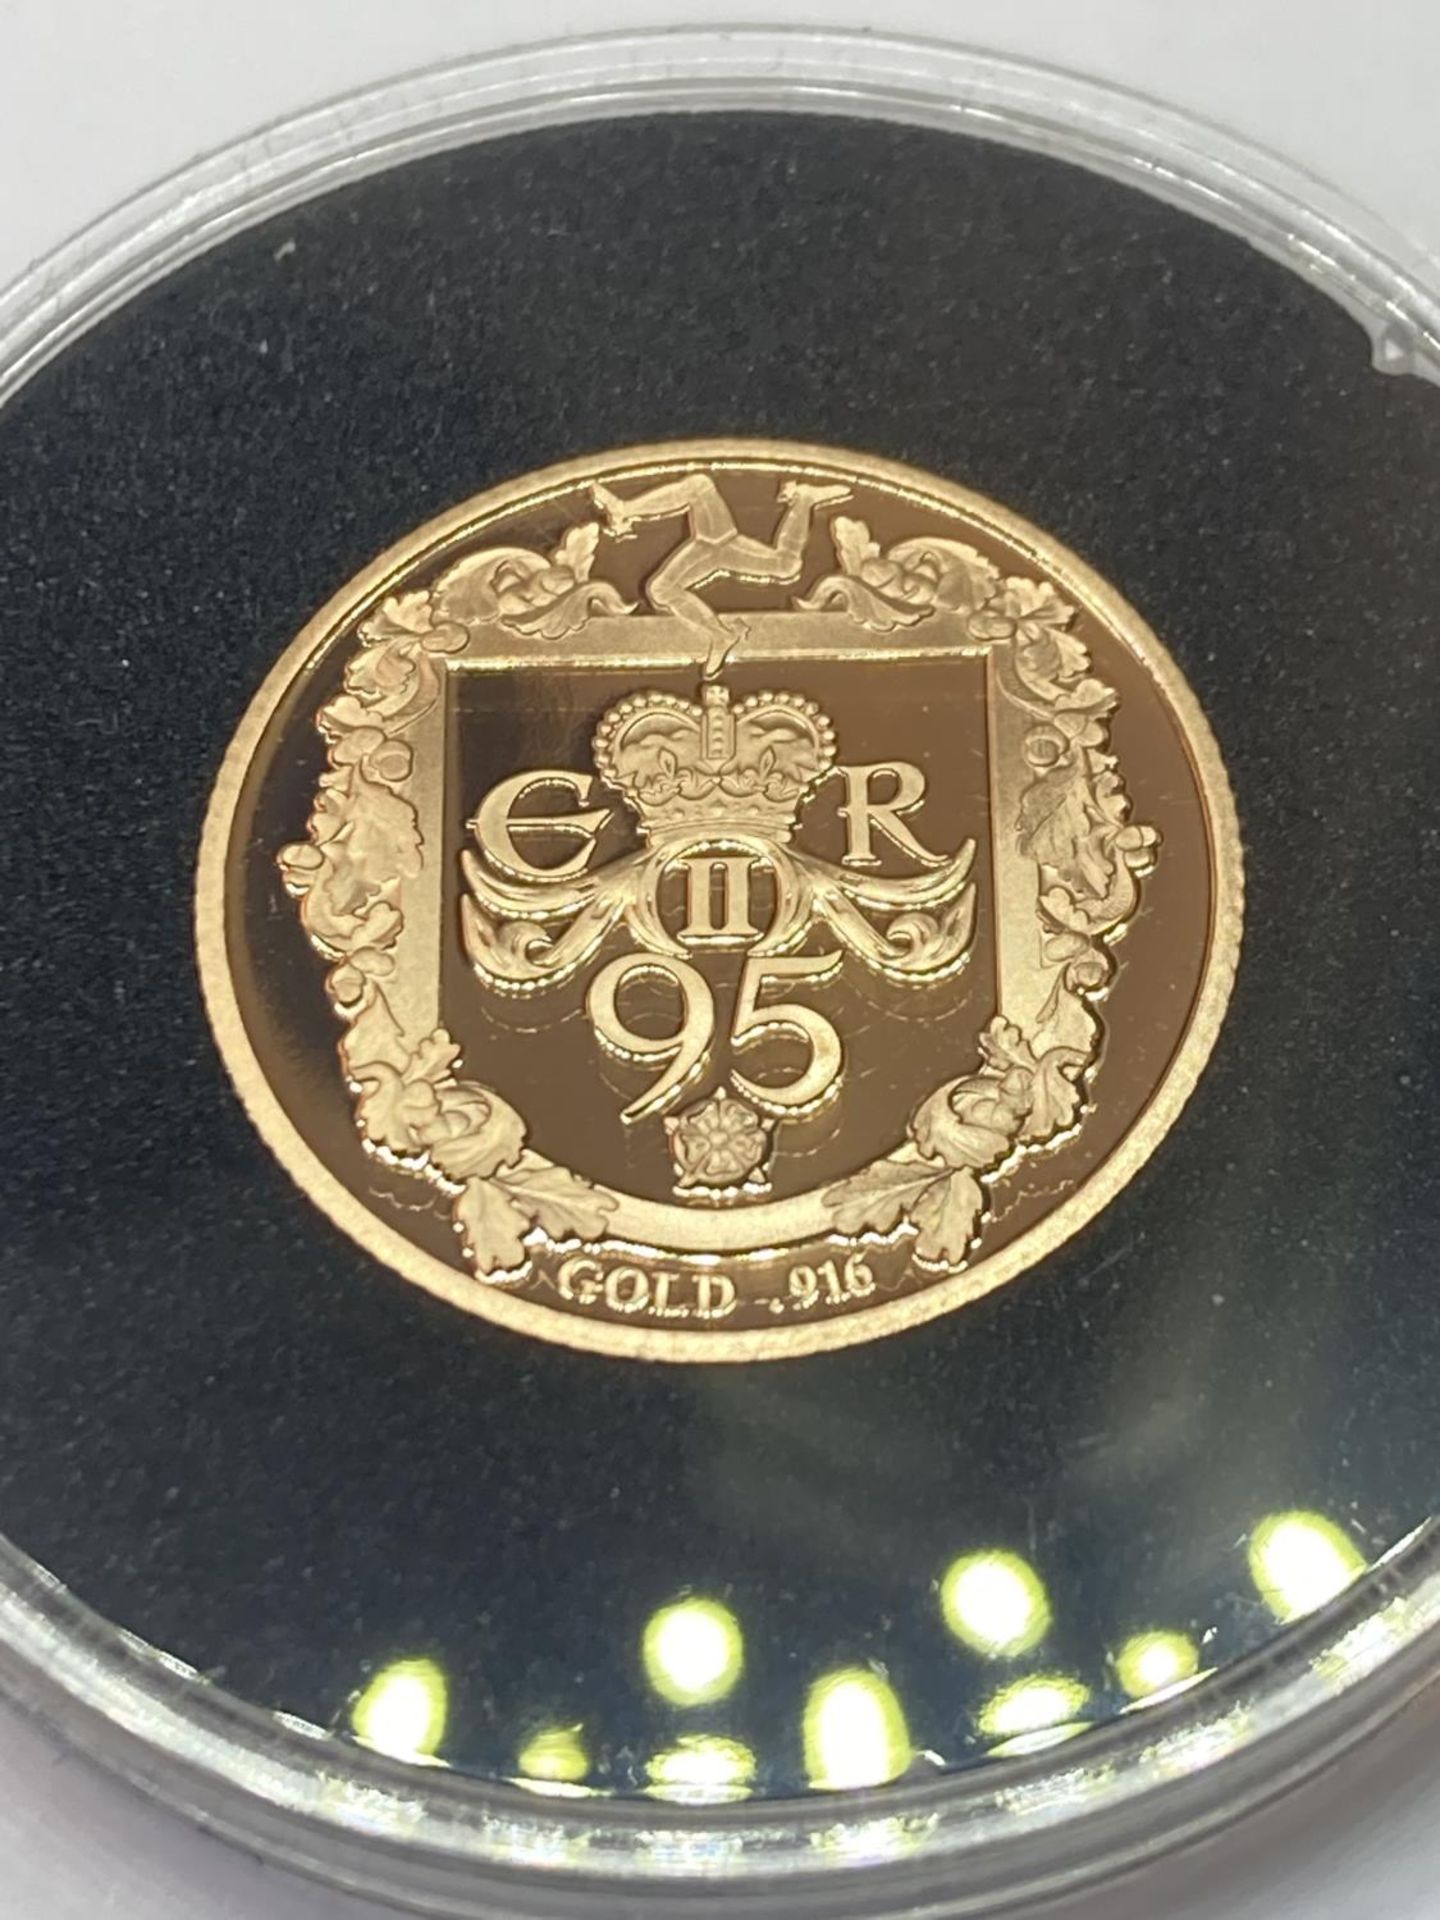 A 2021 QE2 95TH BIRTHDAY ISLE OF MAN GOLD PROOF SOVEREIGN LIMITED EDITION NUMBER 540 OF 995 - Image 2 of 4